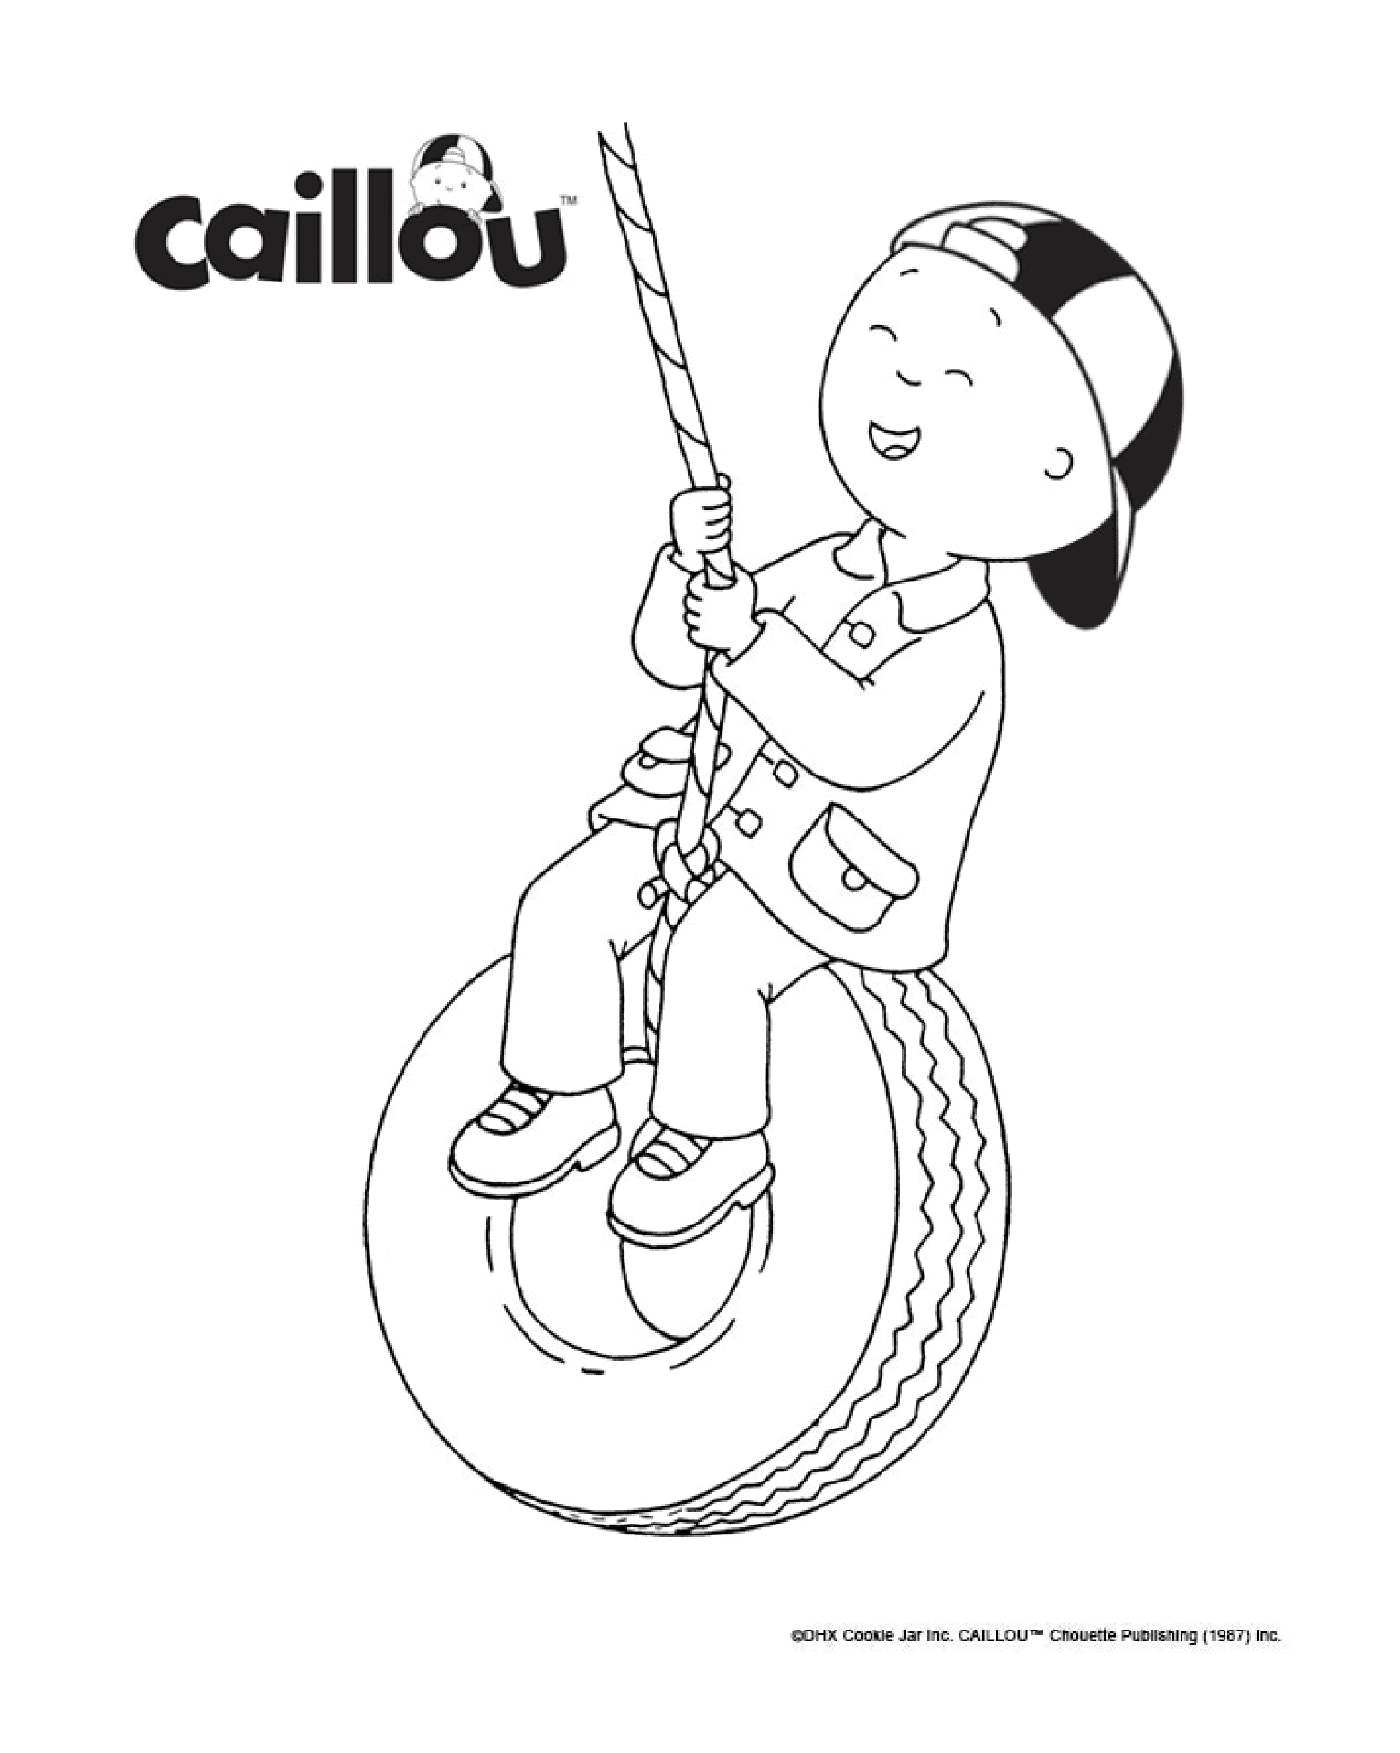  Caillou swings on a beautiful sunny day 